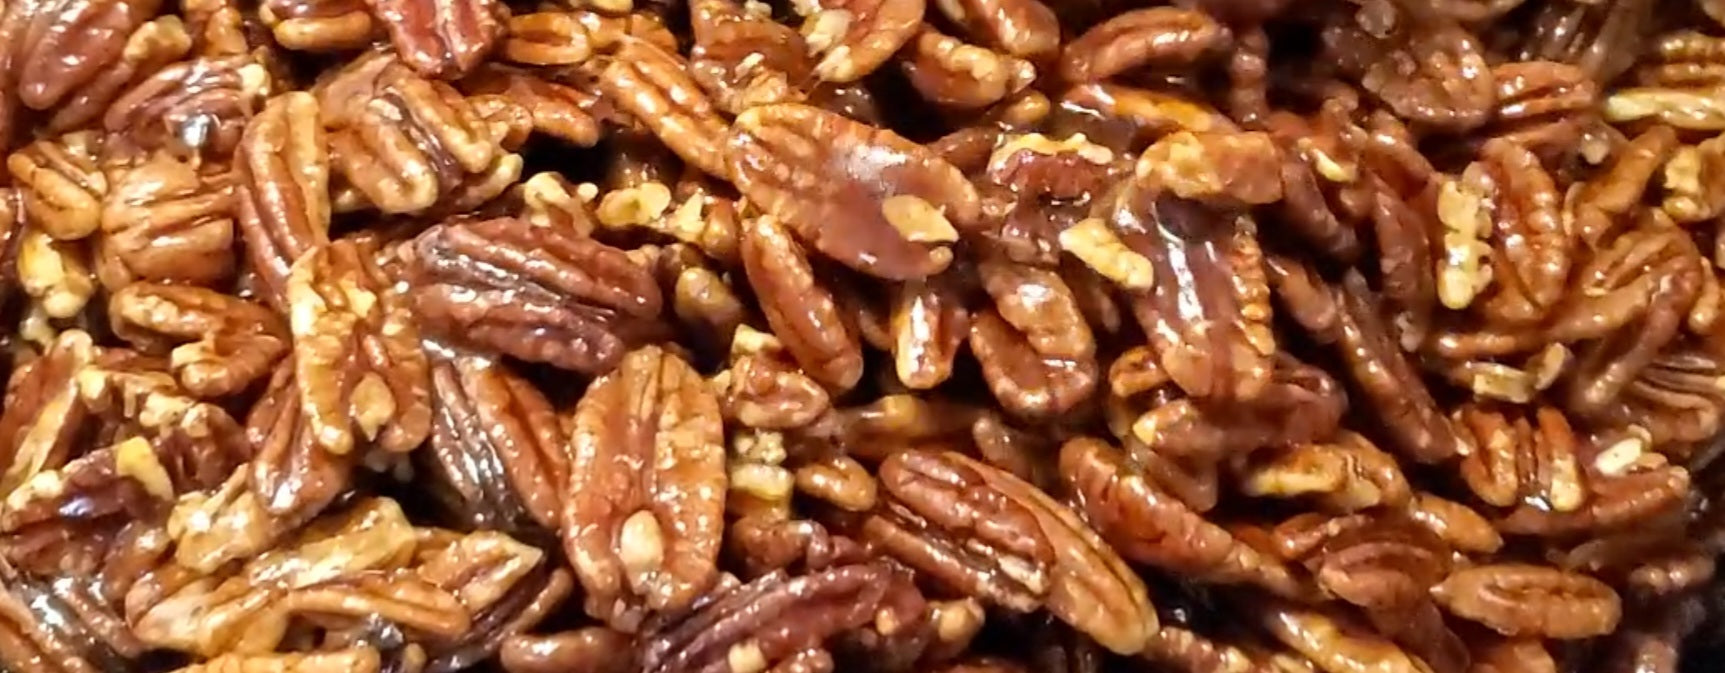 Large Bag of Candied Pecans